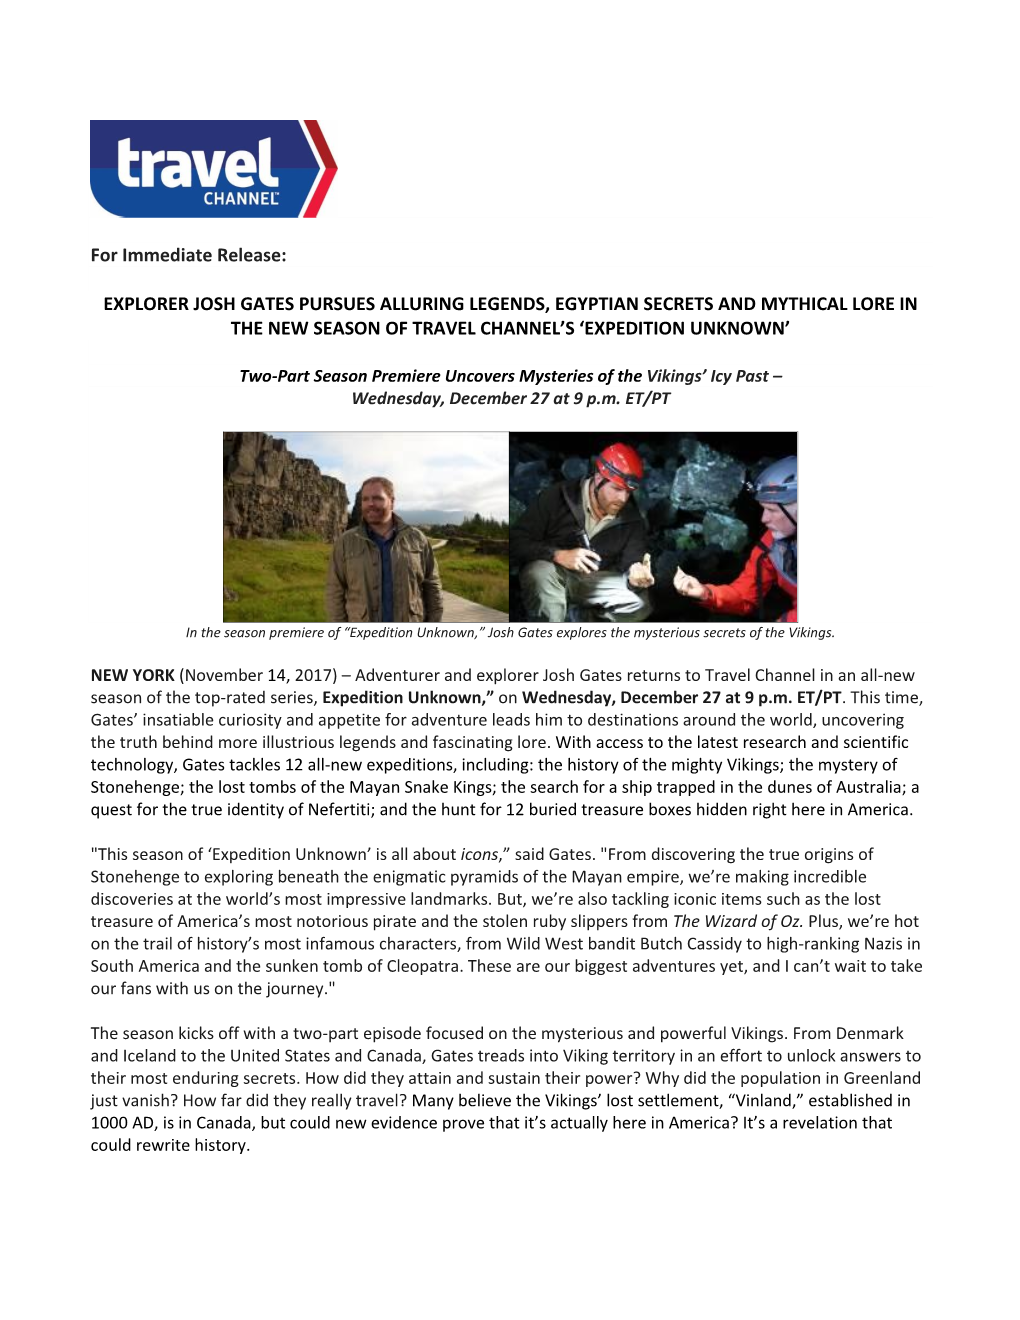 For Immediate Release: EXPLORER JOSH GATES PURSUES ALLURING LEGENDS, EGYPTIAN SECRETS and MYTHICAL LORE in the NEW SEASON OF